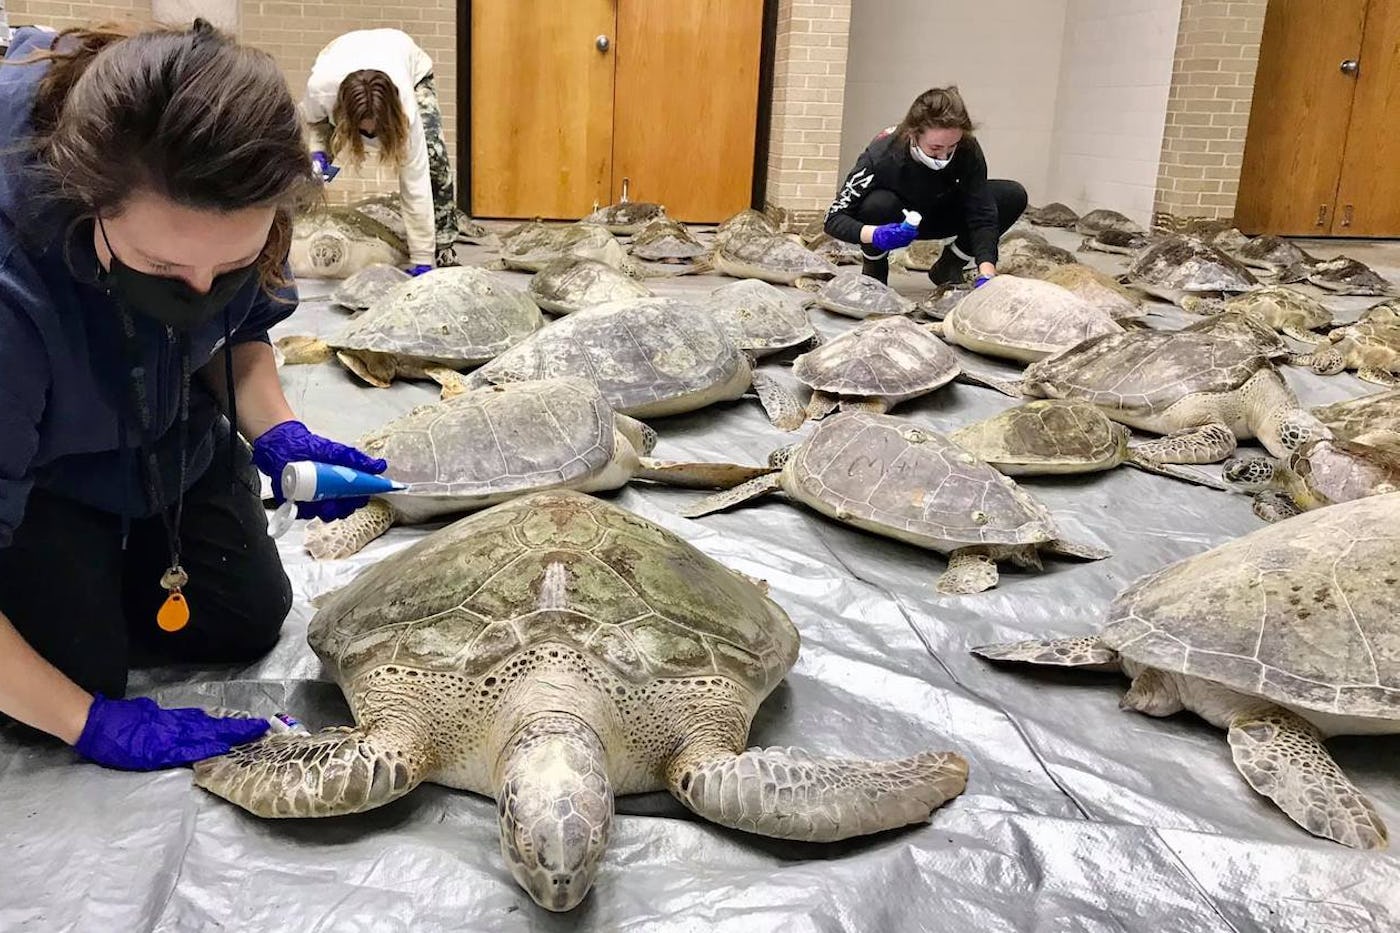 Volunteers wearing face masks cater in an indoor area to dozens of sea turtles